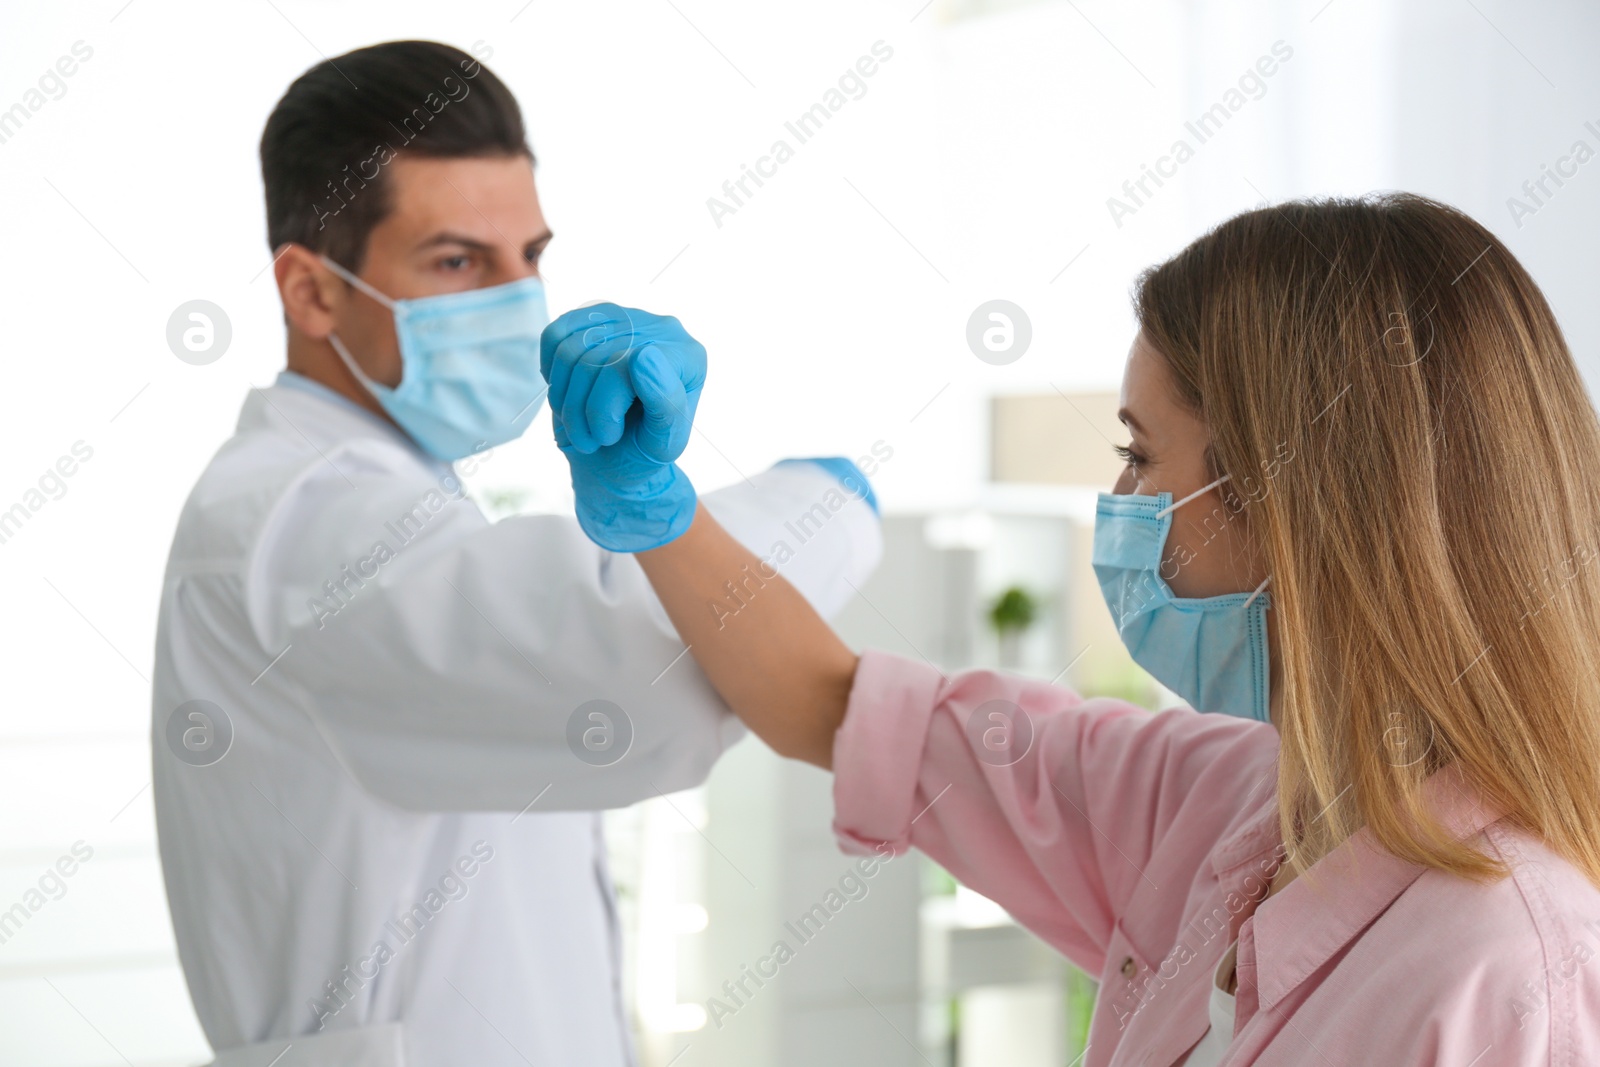 Photo of Doctor and patient doing elbow bump instead of handshake in clinic. New greeting during COVID-19 pandemic